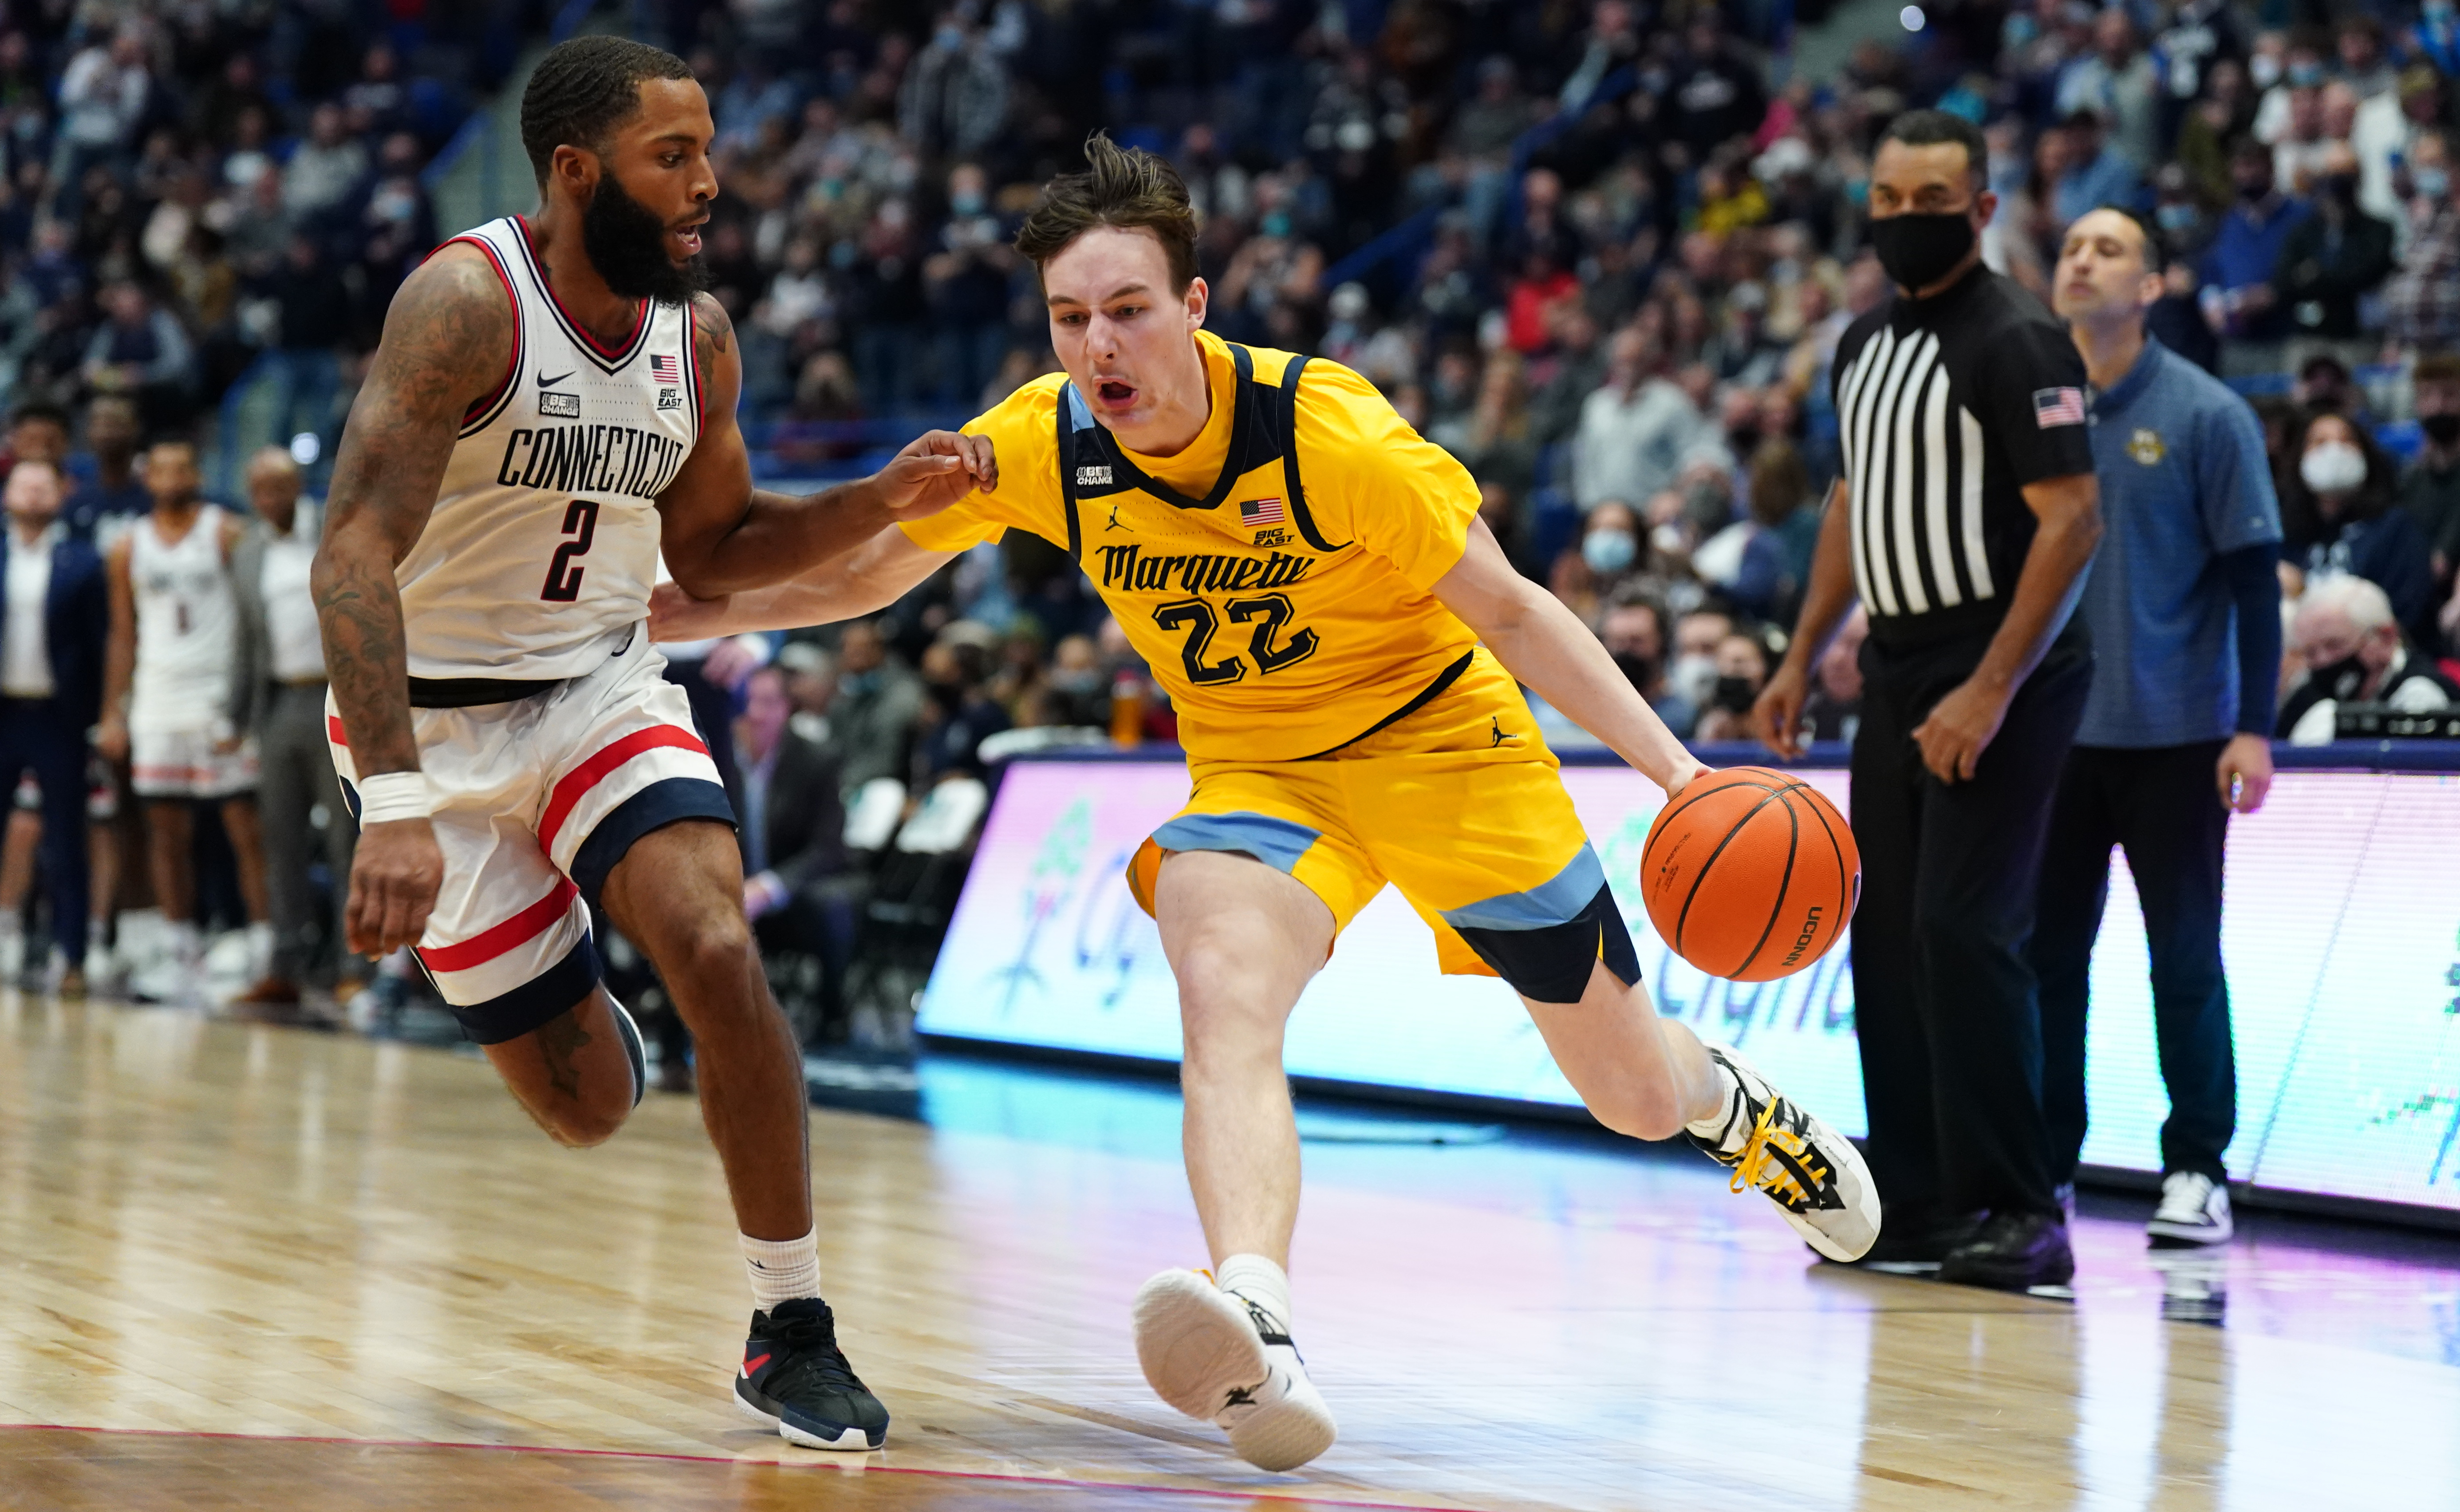 NCAA Basketball: Marquette at Connecticut